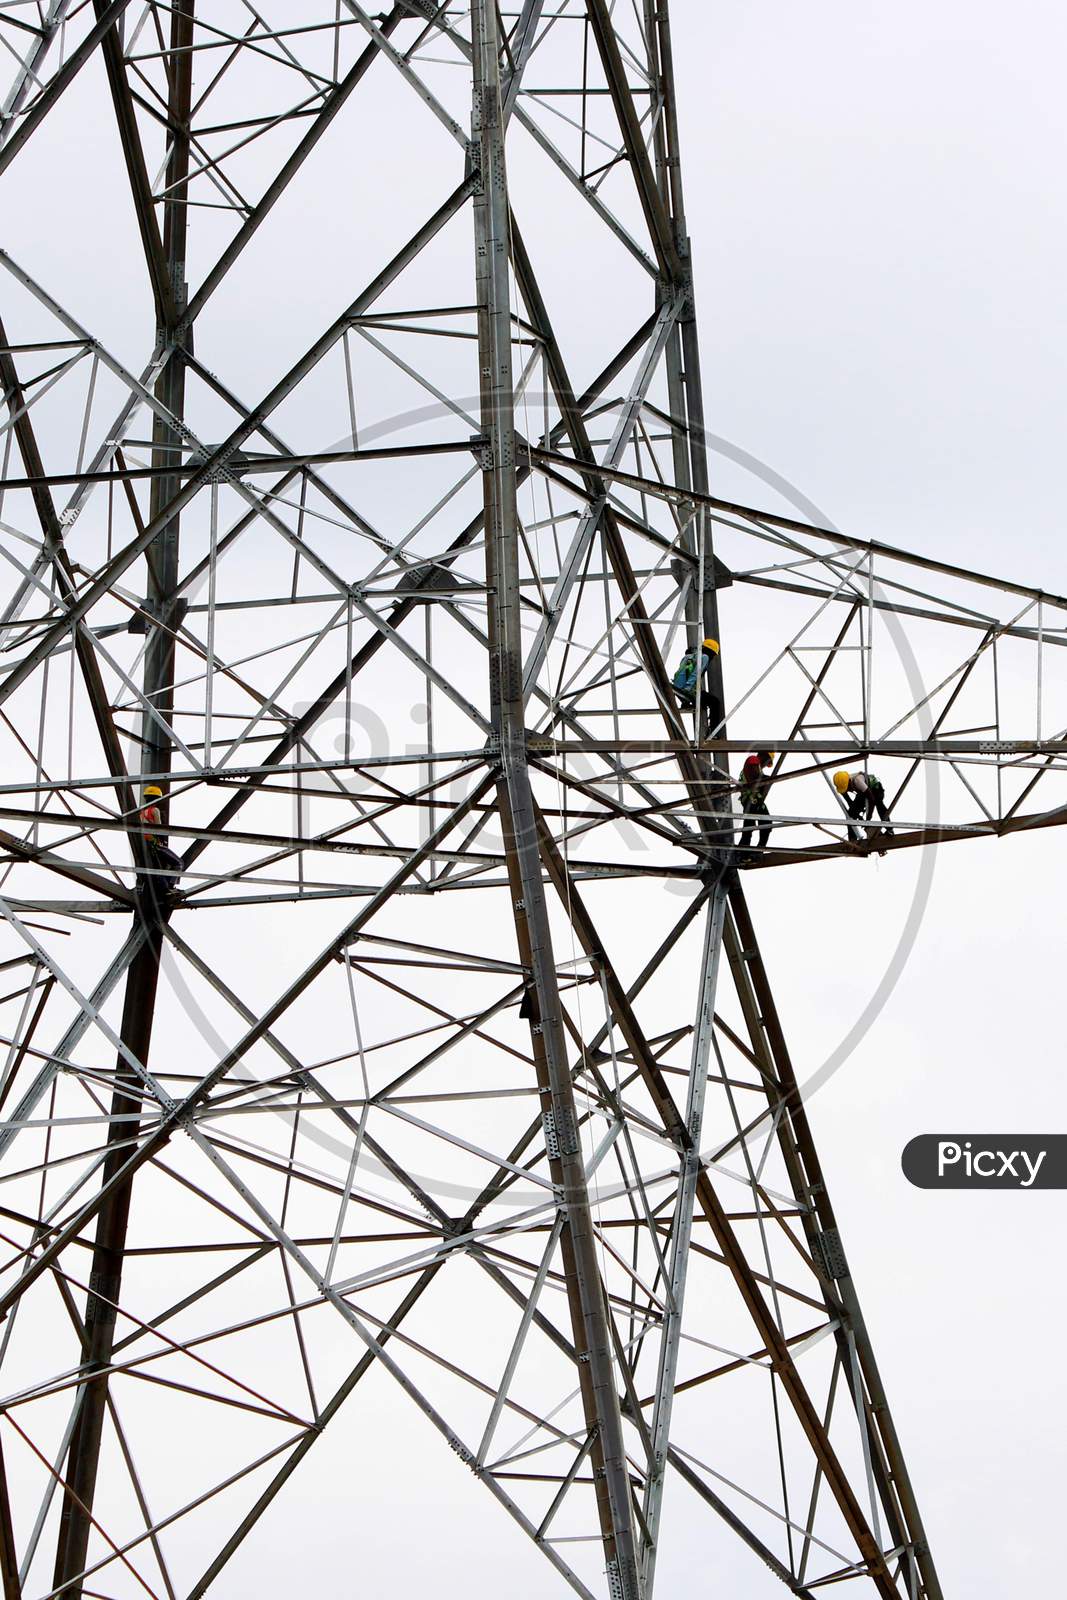 Indian workers install a new electric pole for power lines on the outskirts of Ajmer on August 23, 2020.